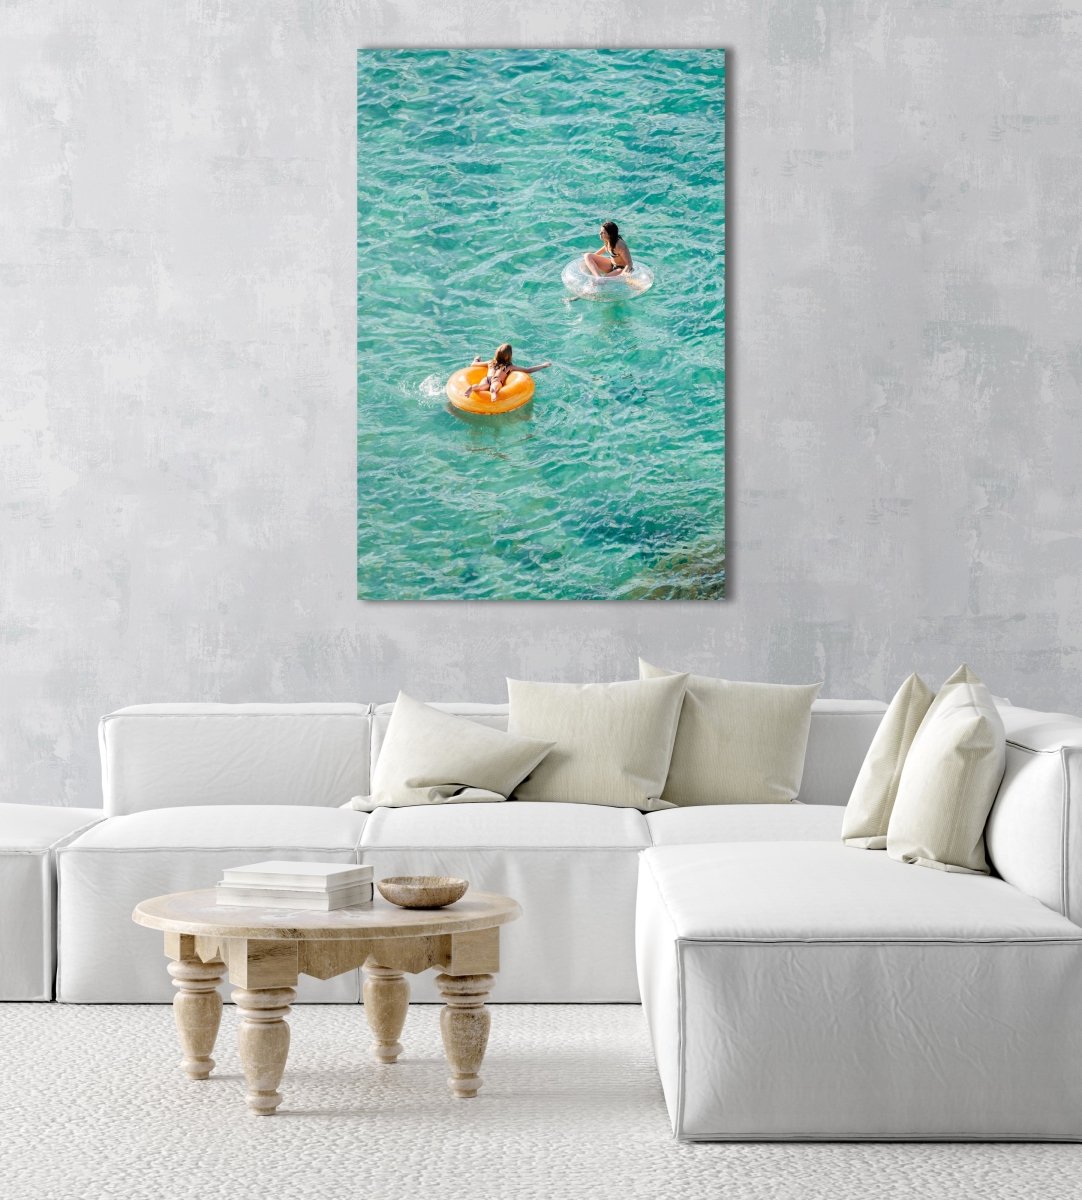 Young girl and woman floating on round lilos in turquoise sea in an acrylic/perspex frame